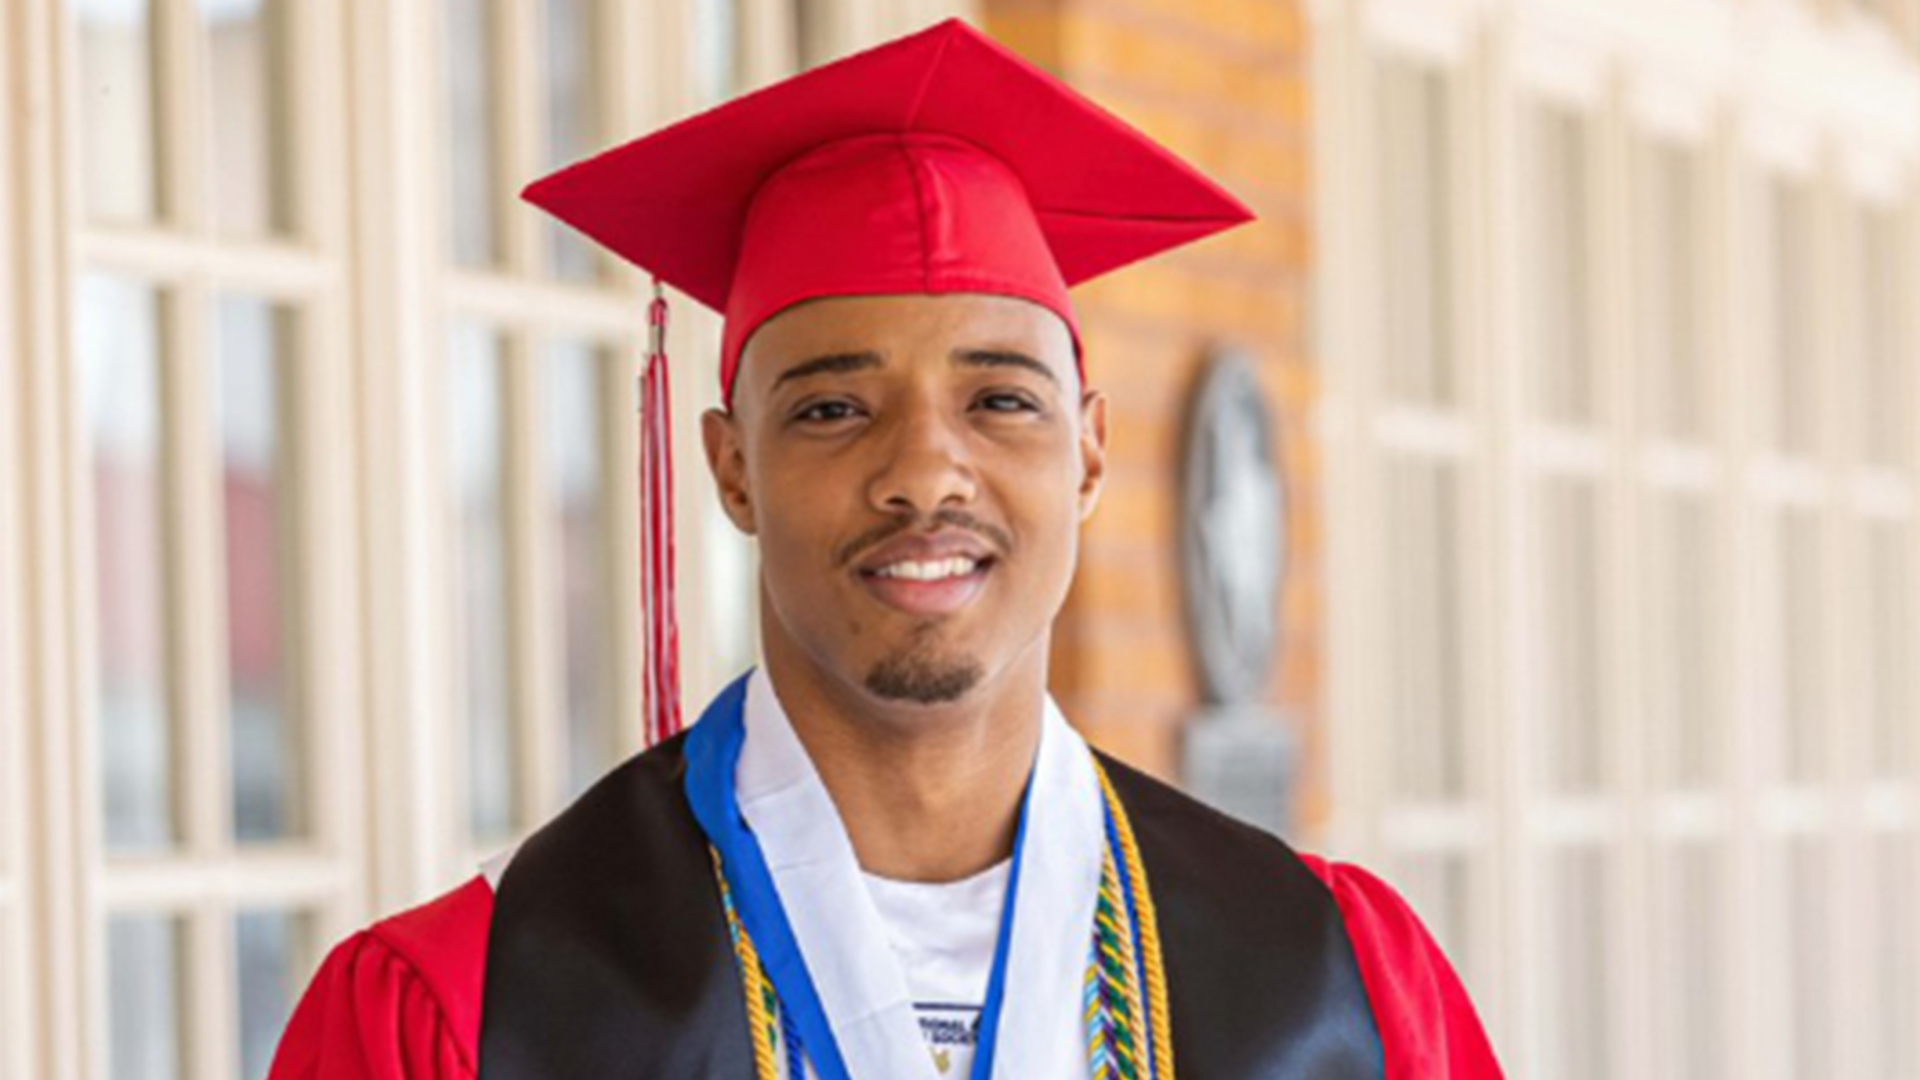 Nicholas Watson Defies The Odds And Graduates With The Highest GPA In His School's History